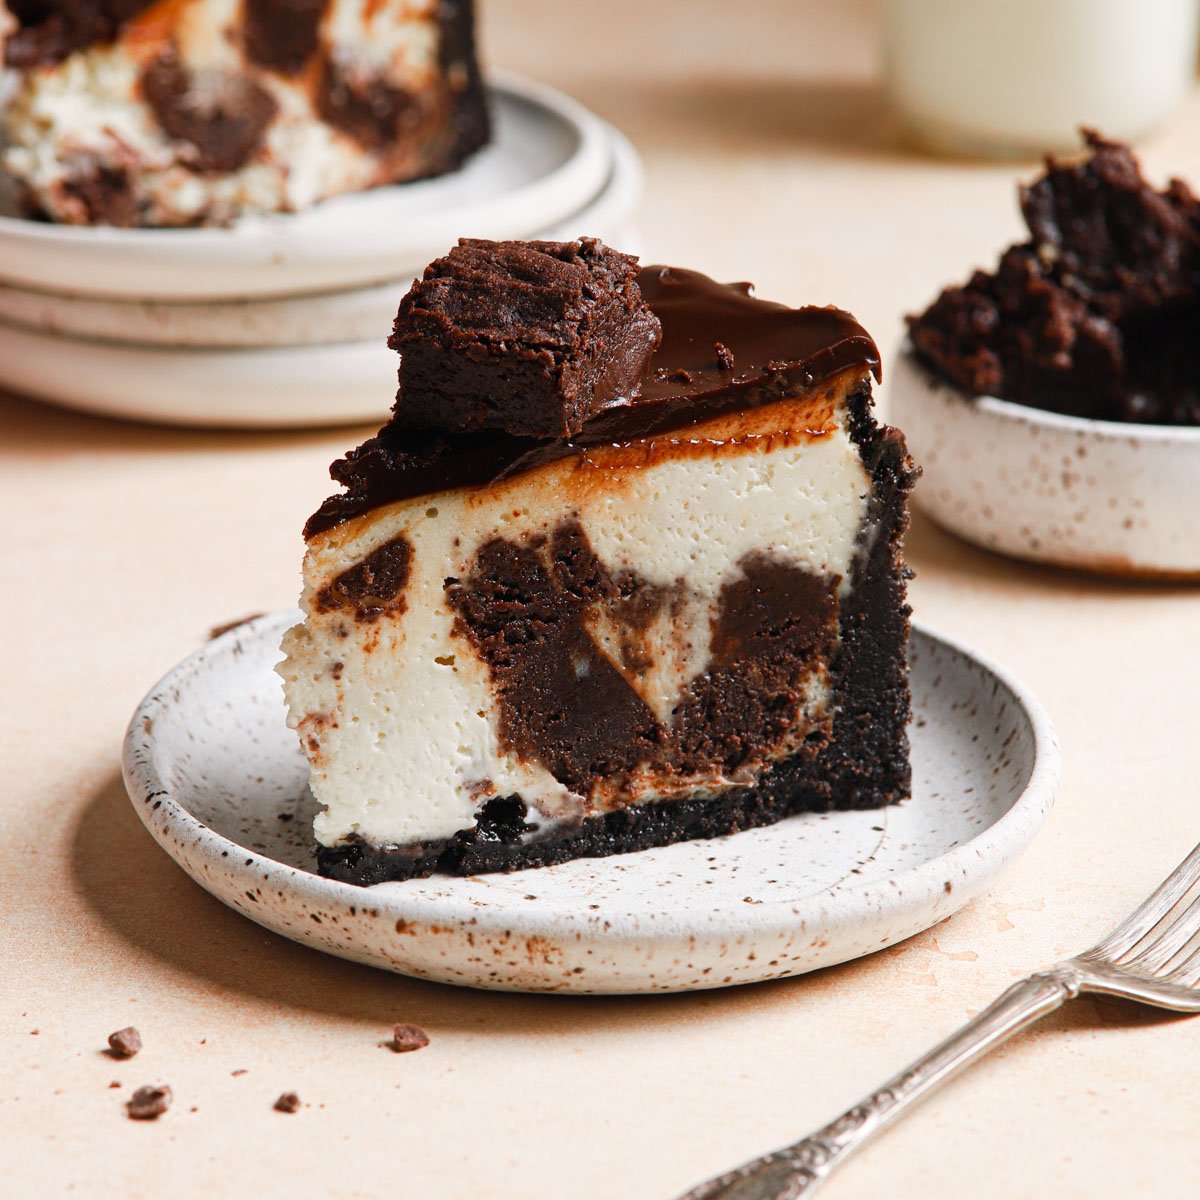 The BEST Brownie Cheesecake (with Ganache!) picture pic